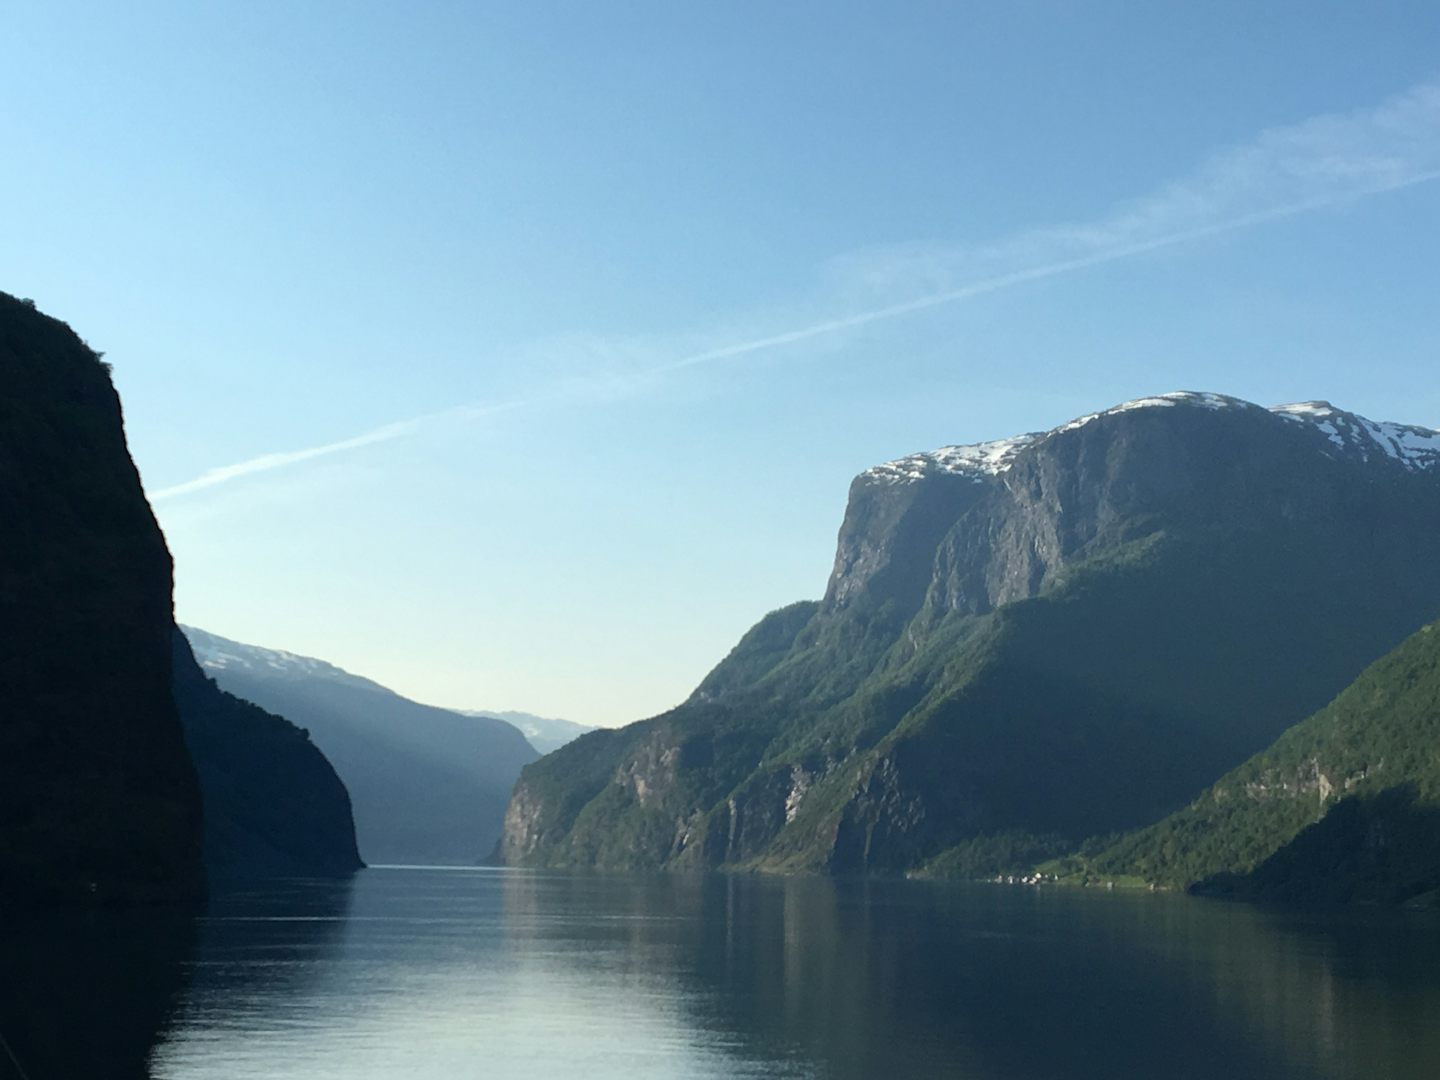 Early morning on a fjord heading to Flam, Norway